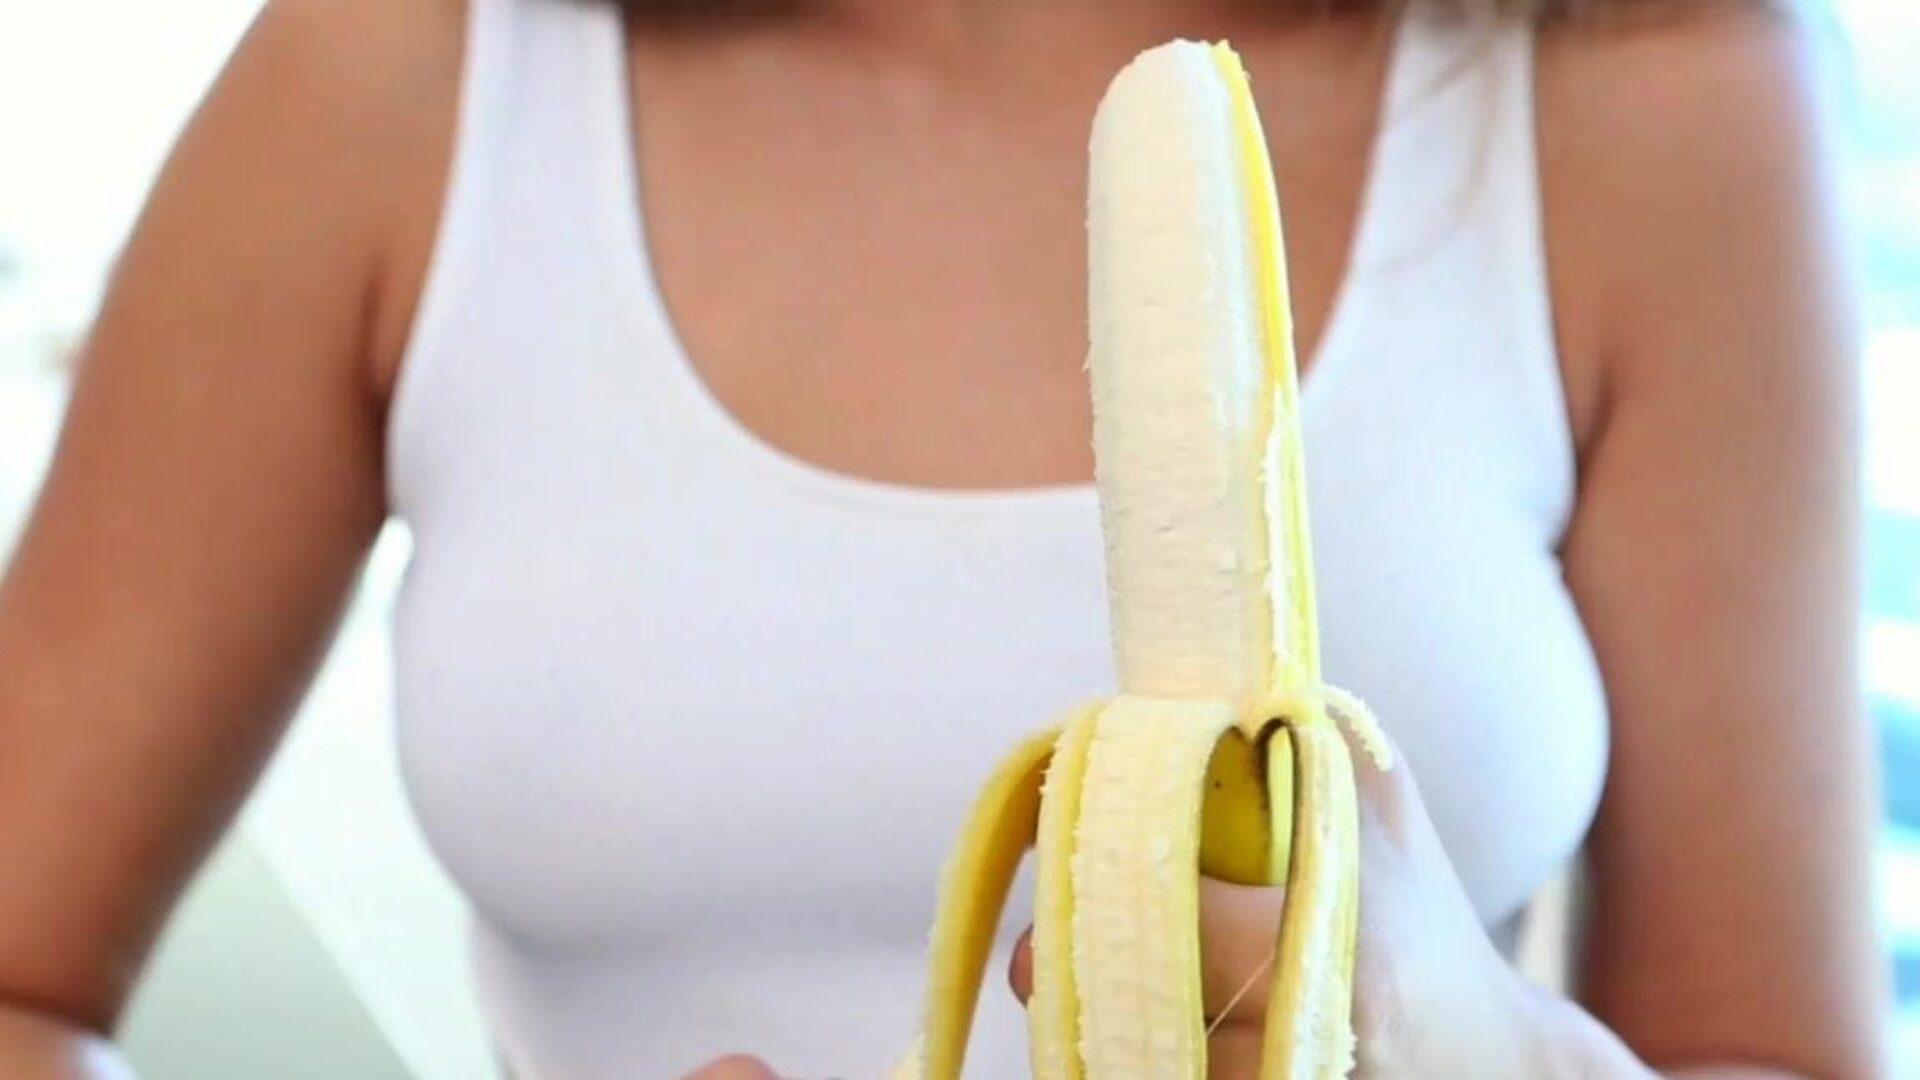 Jacking Off With A Banana